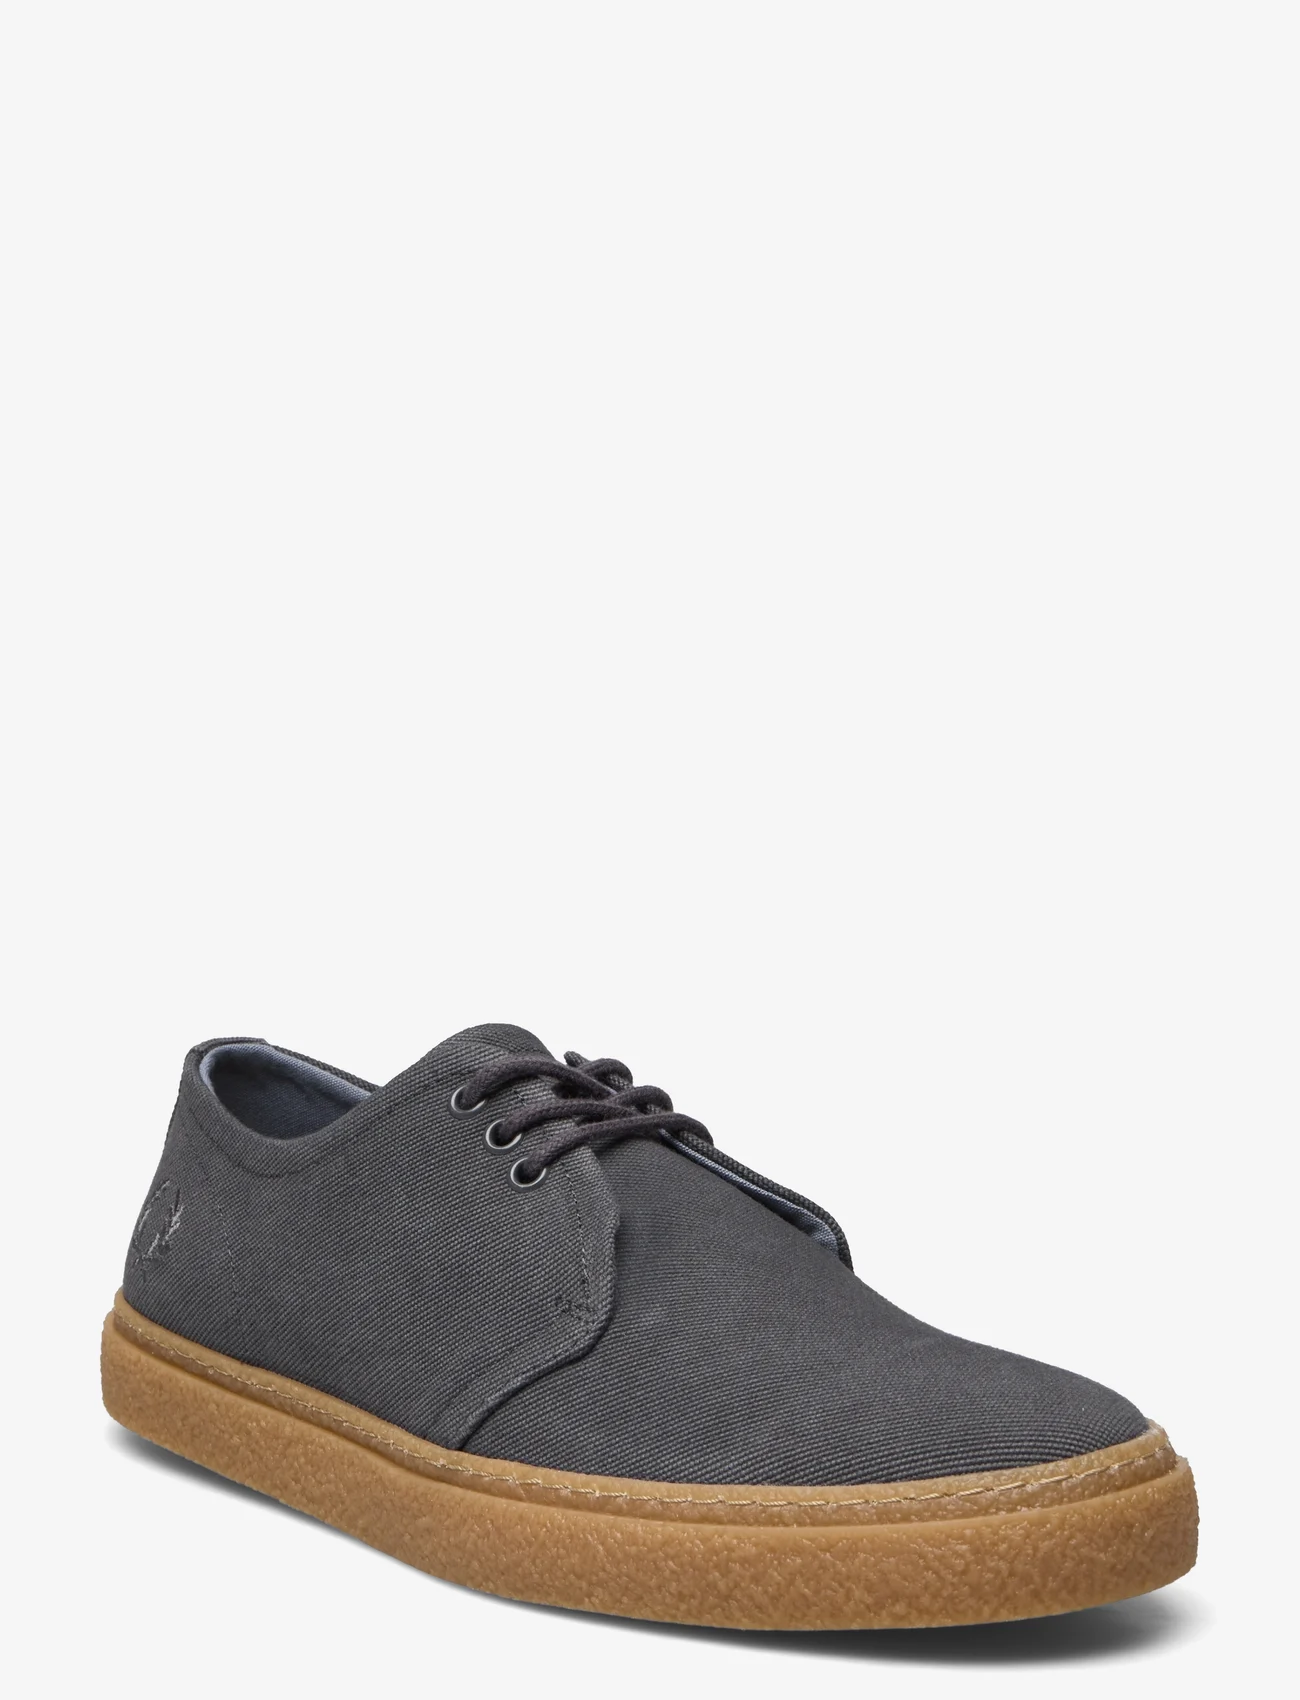 Fred Perry - LINDEN CANVAS - lav ankel - charcoal - 0